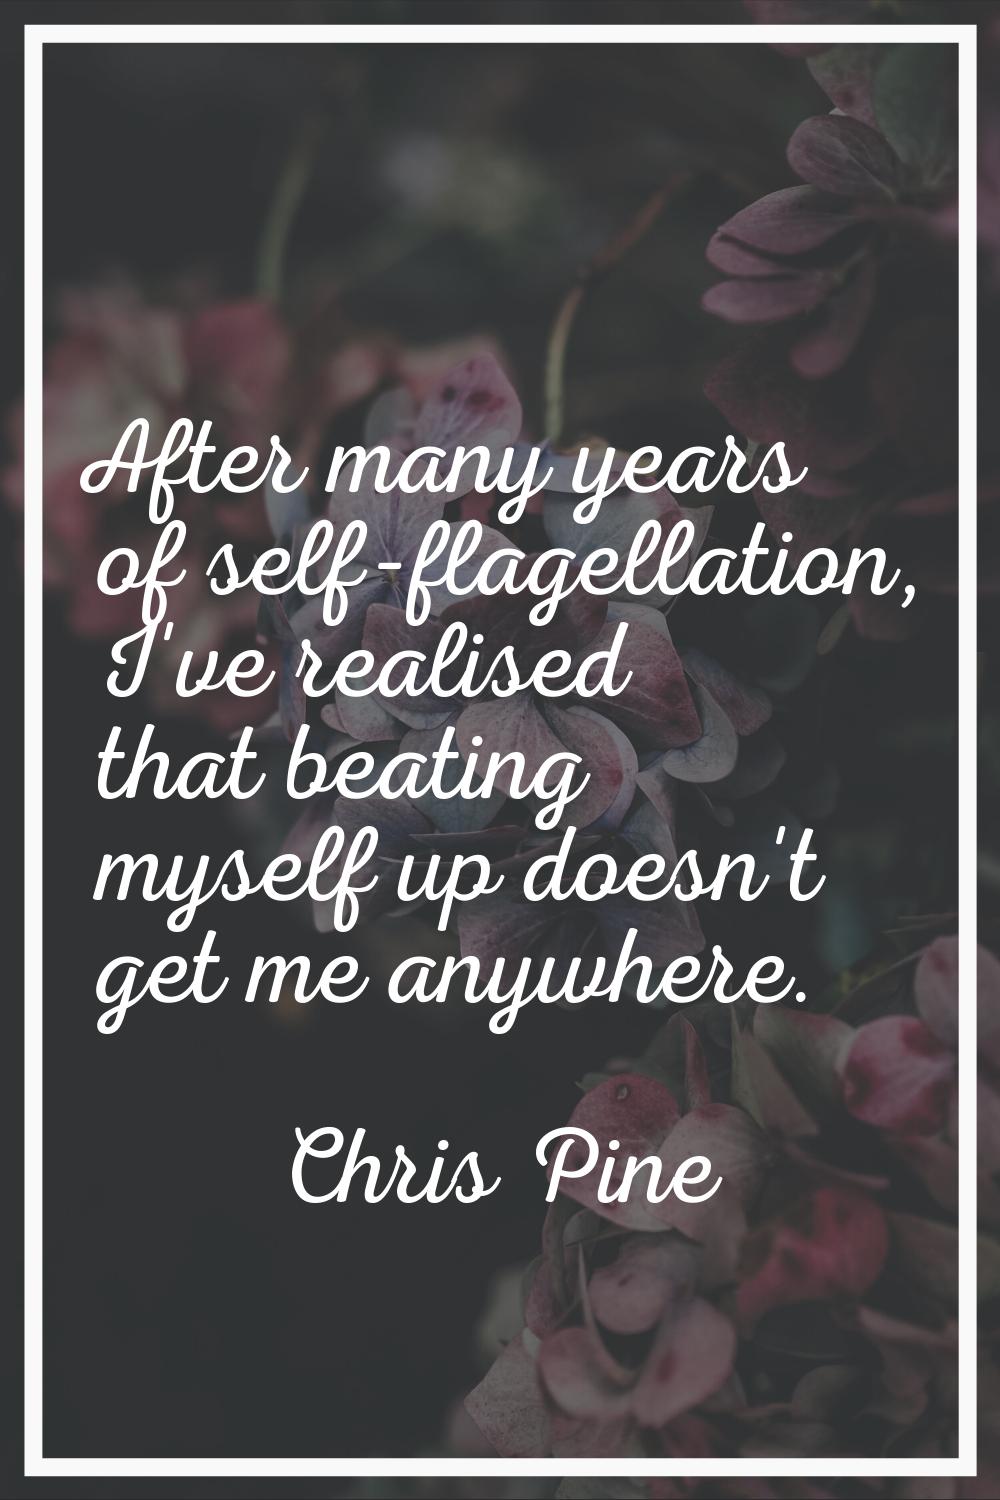 After many years of self-flagellation, I've realised that beating myself up doesn't get me anywhere